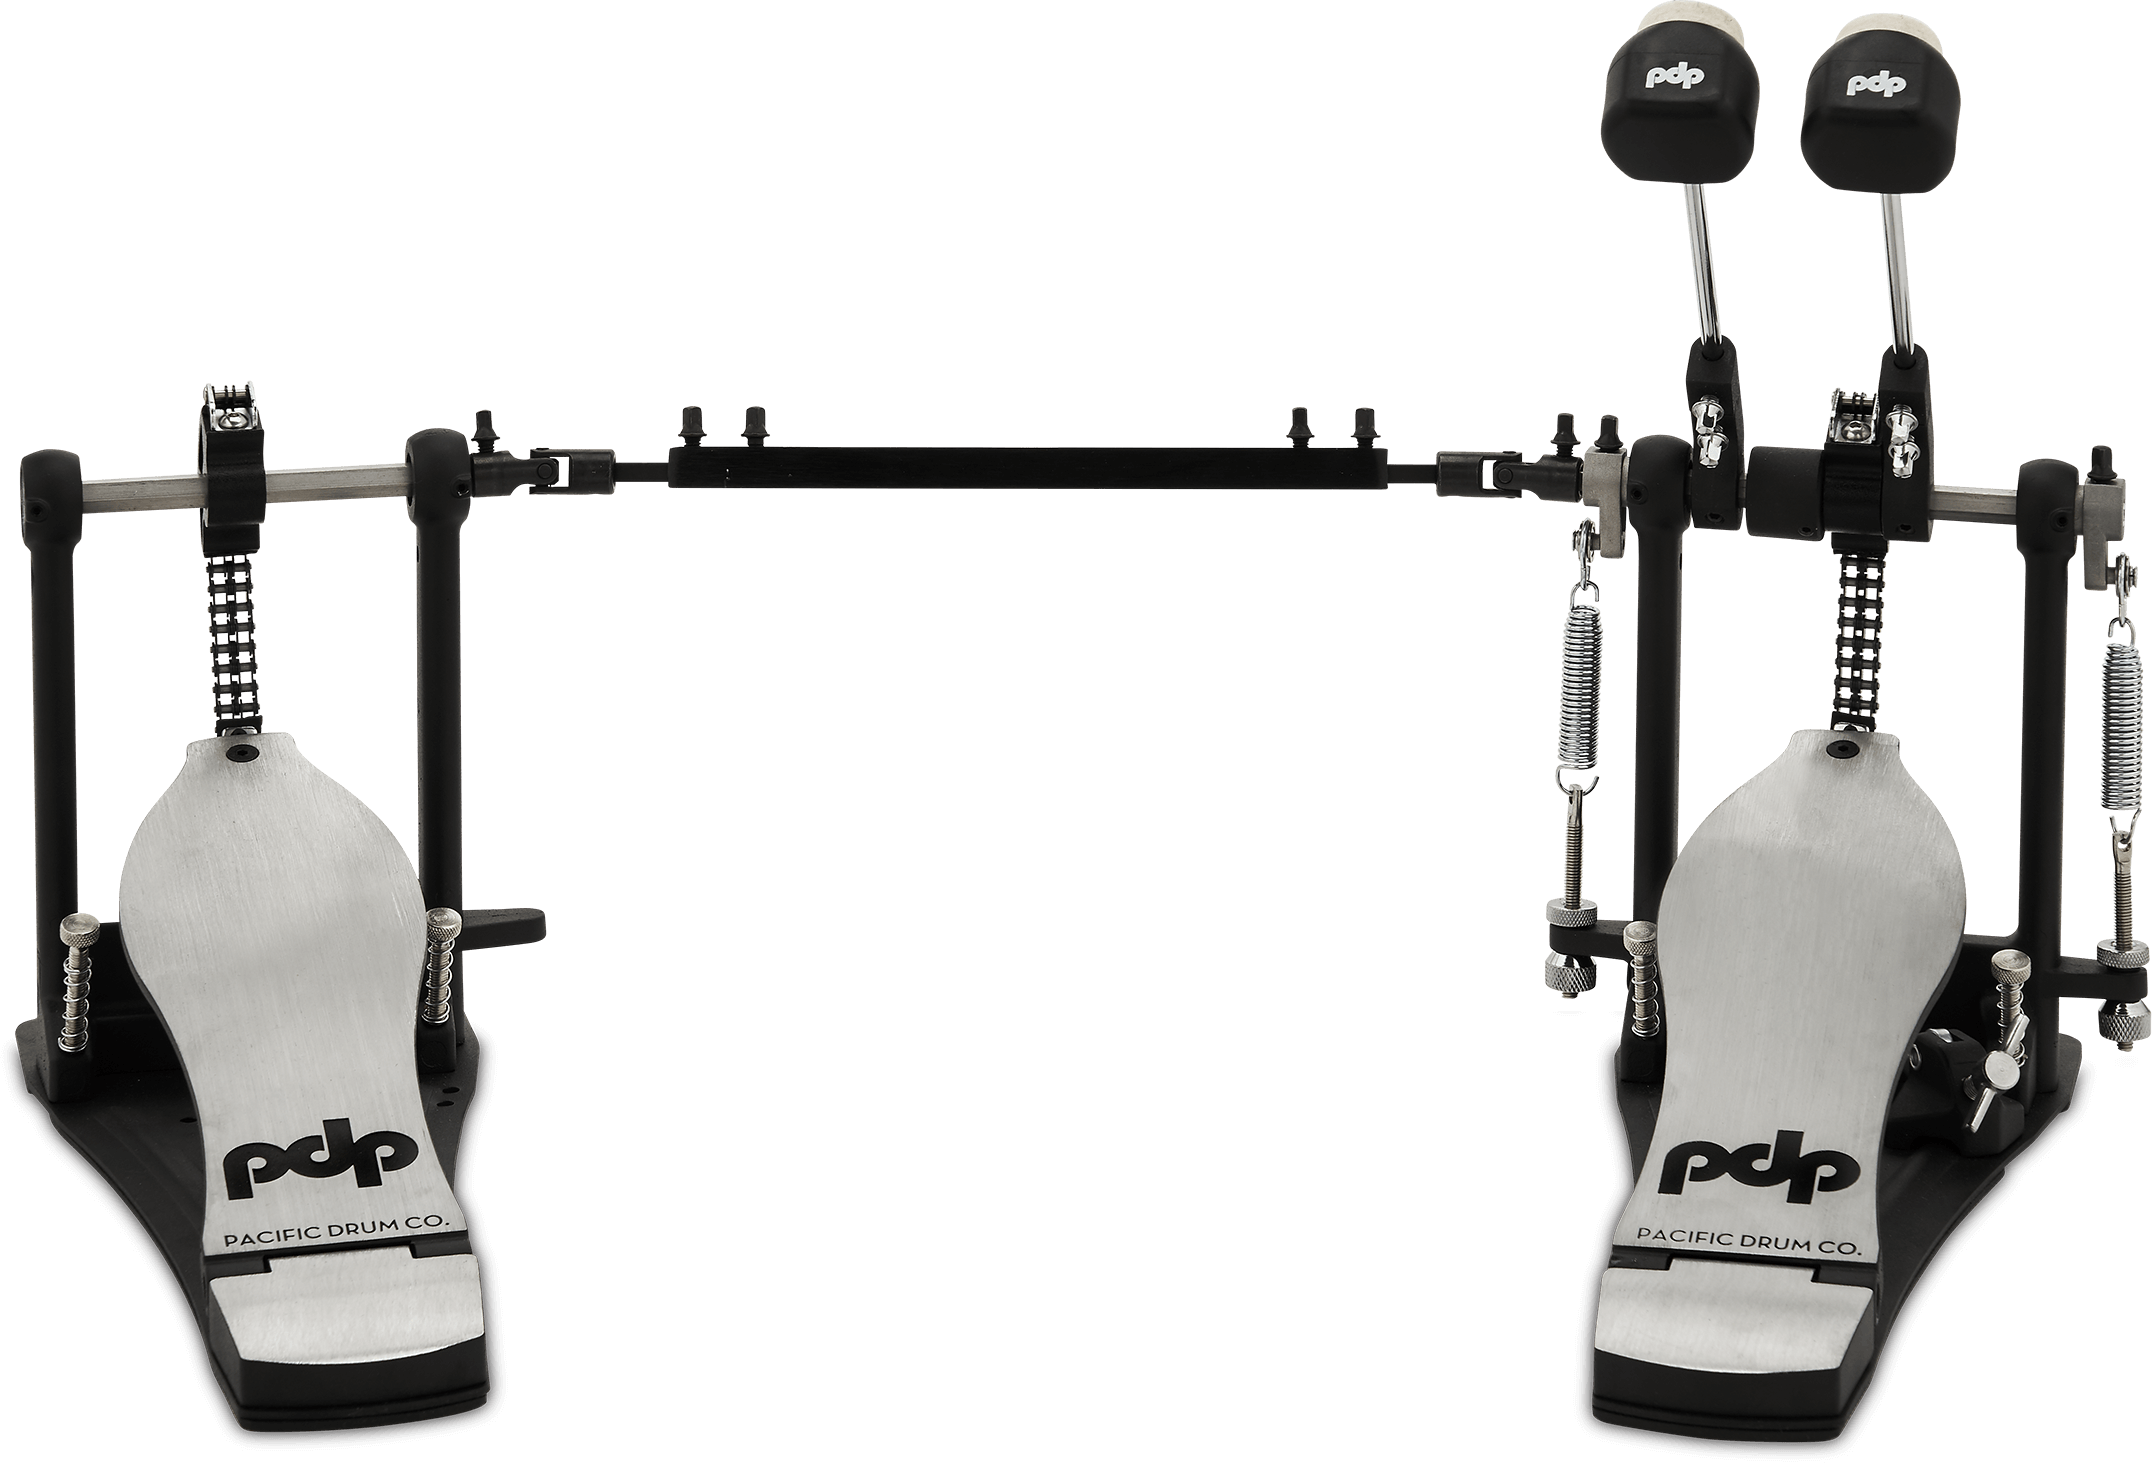 Pdp Pddp 812 Serie 800 Double Pedale - Bass drum pedal - Main picture